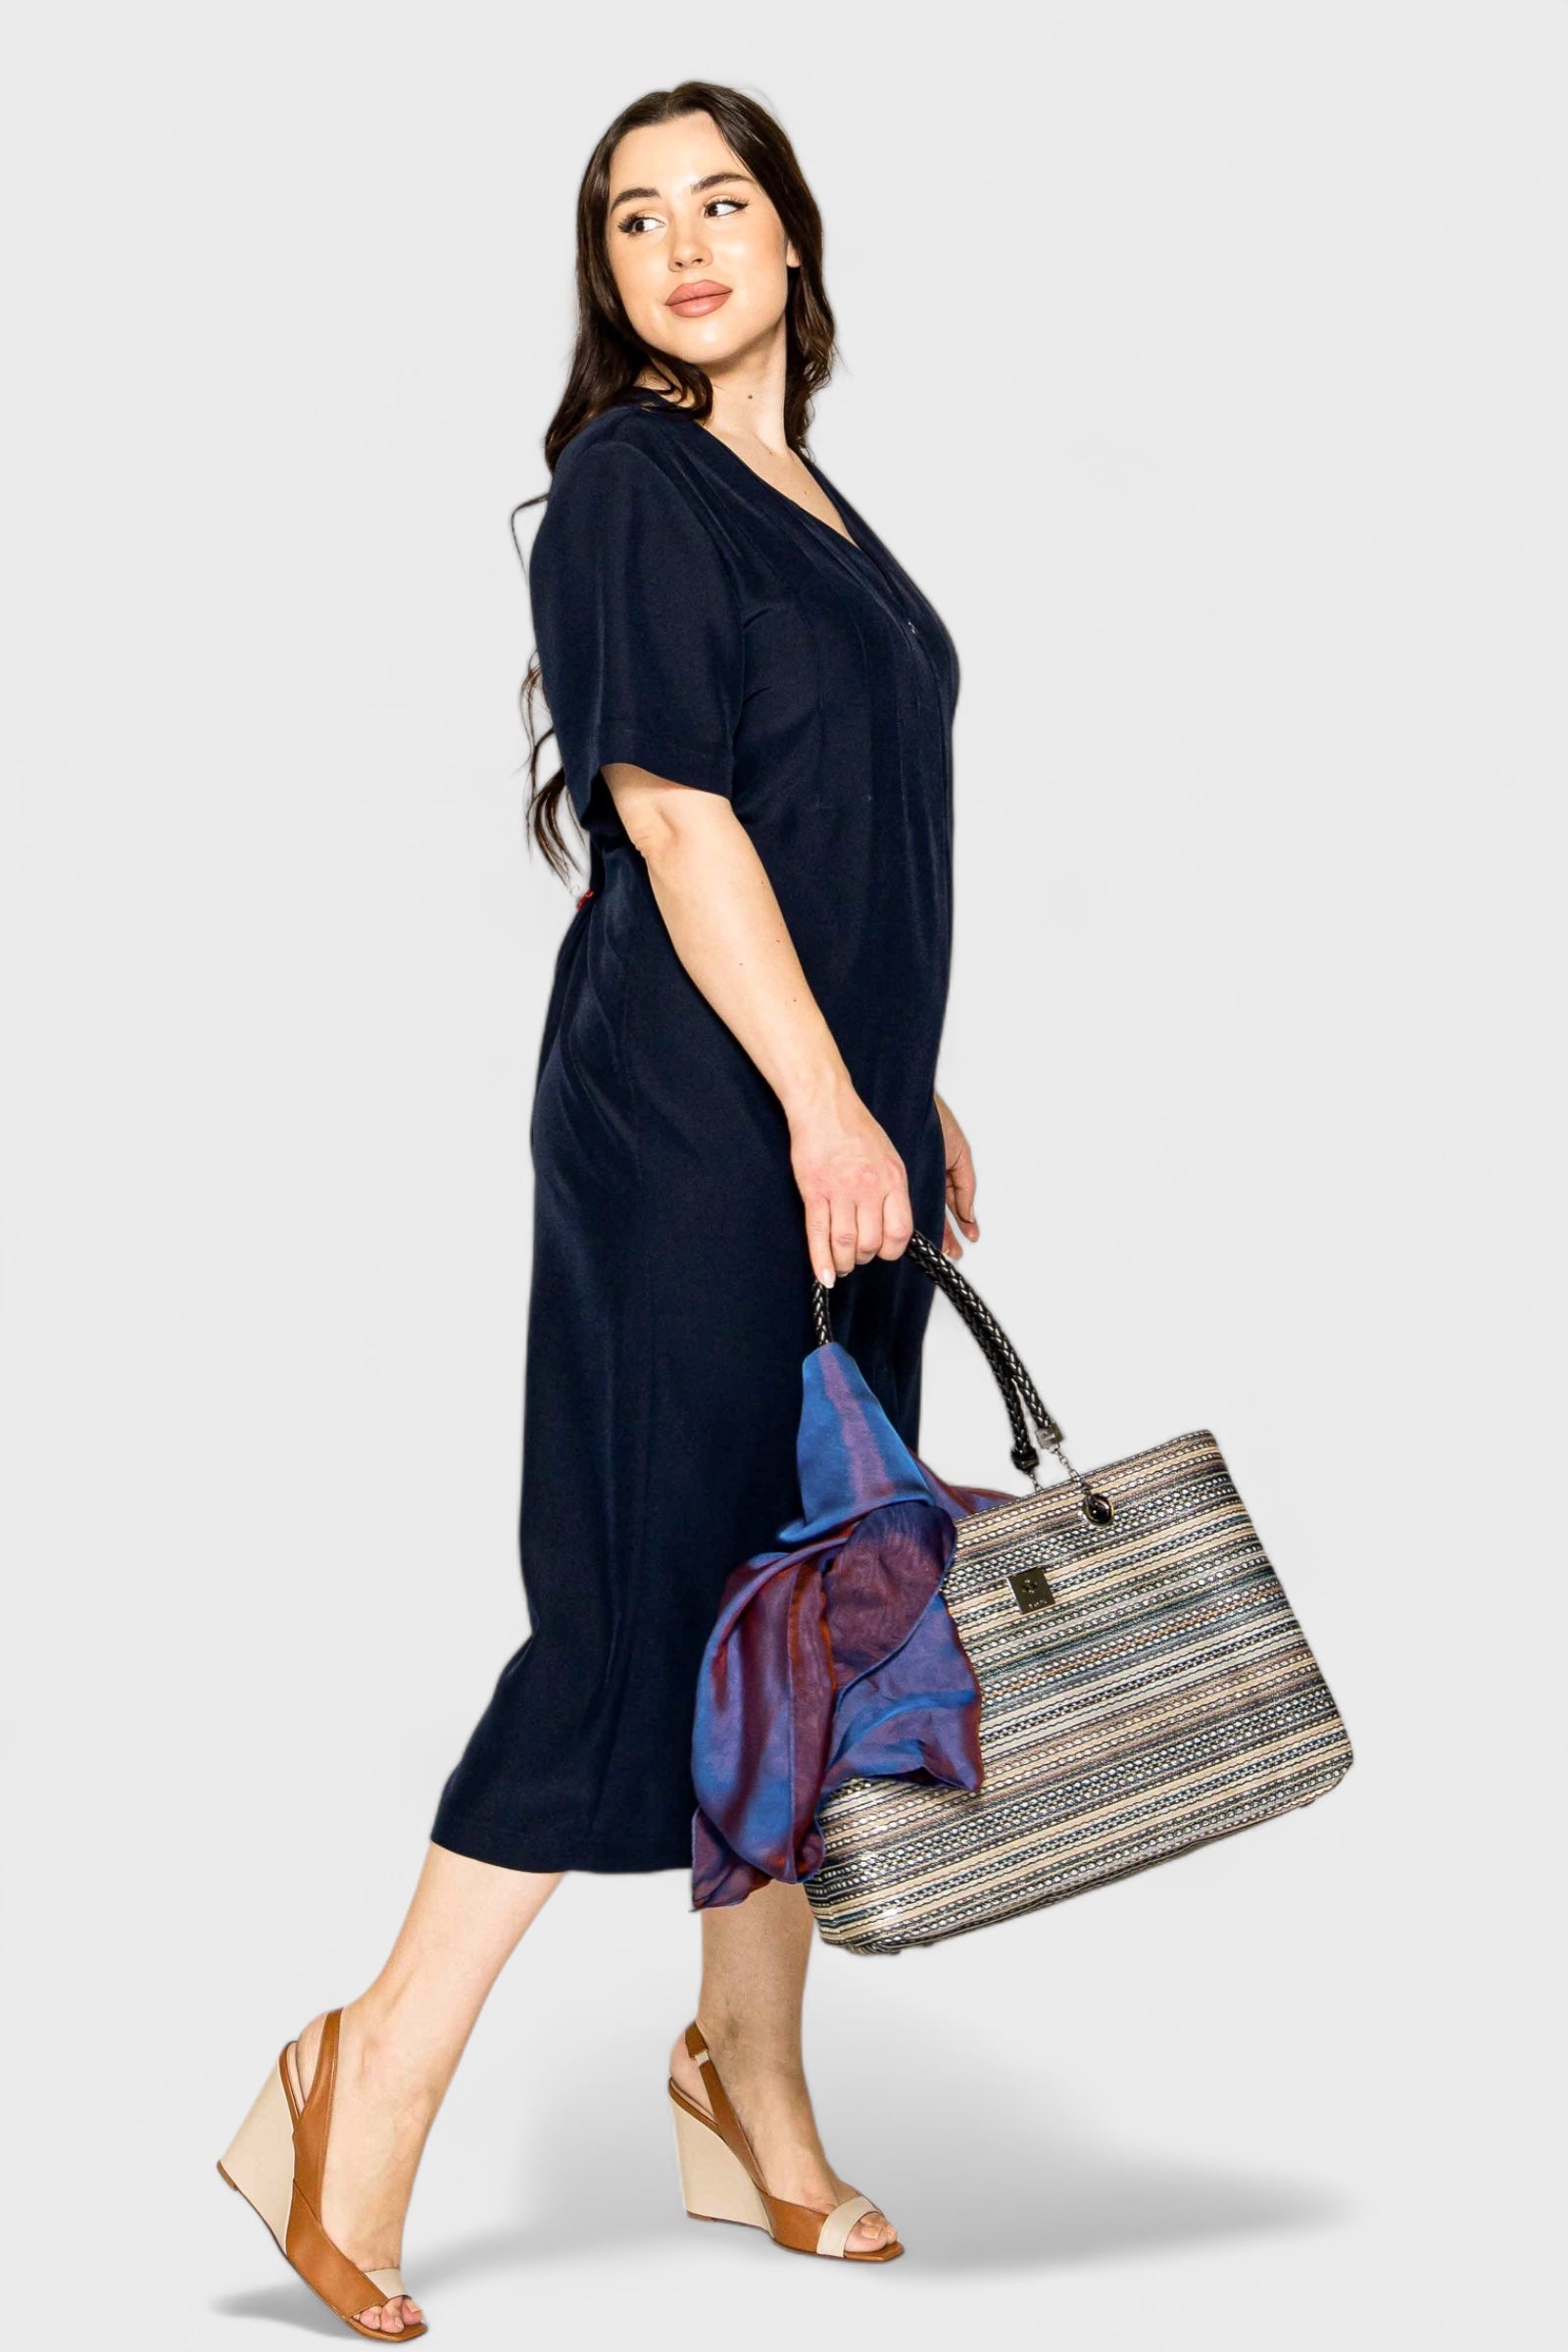 Gabriella Navy Blue Midi Dress Paired with Abree Stripe Tote Bag, Verona Wedge Sandals and Murano Scarf